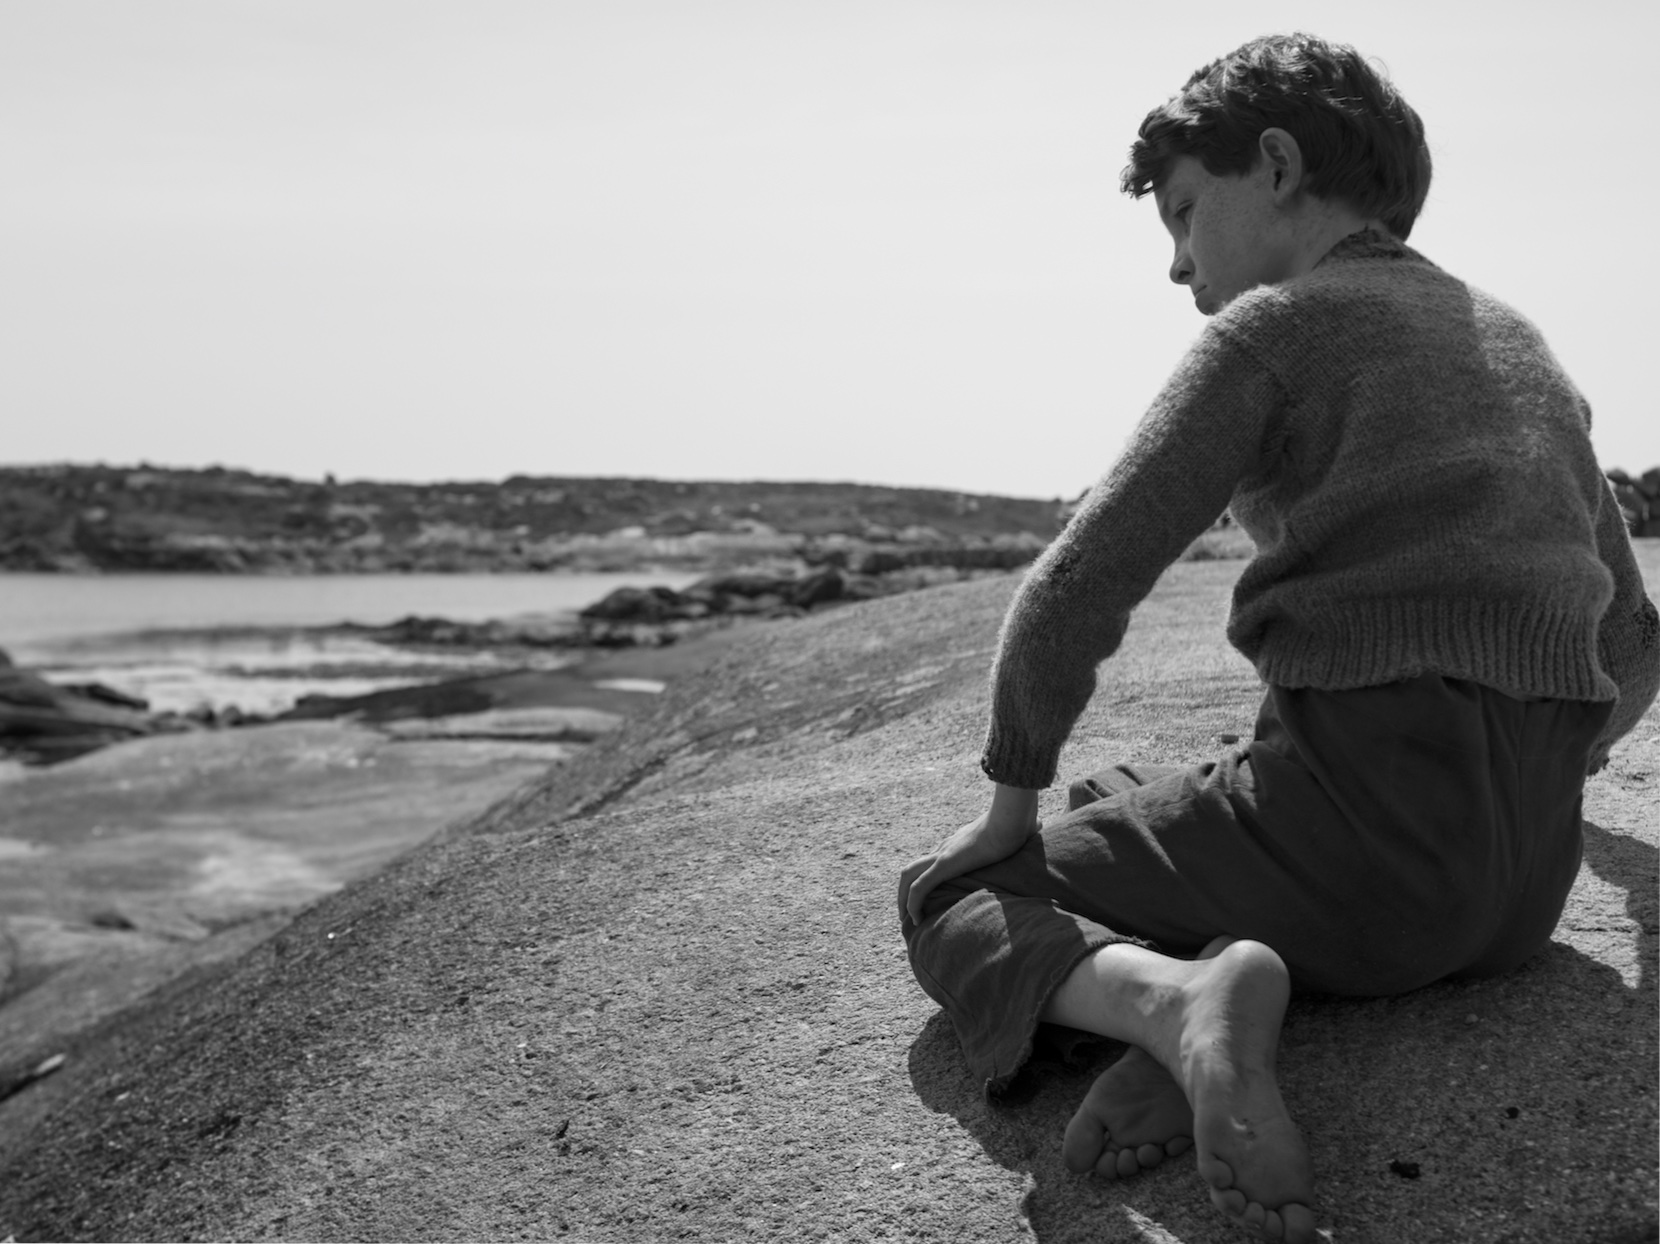 A boy is sitting on the ground near a river.